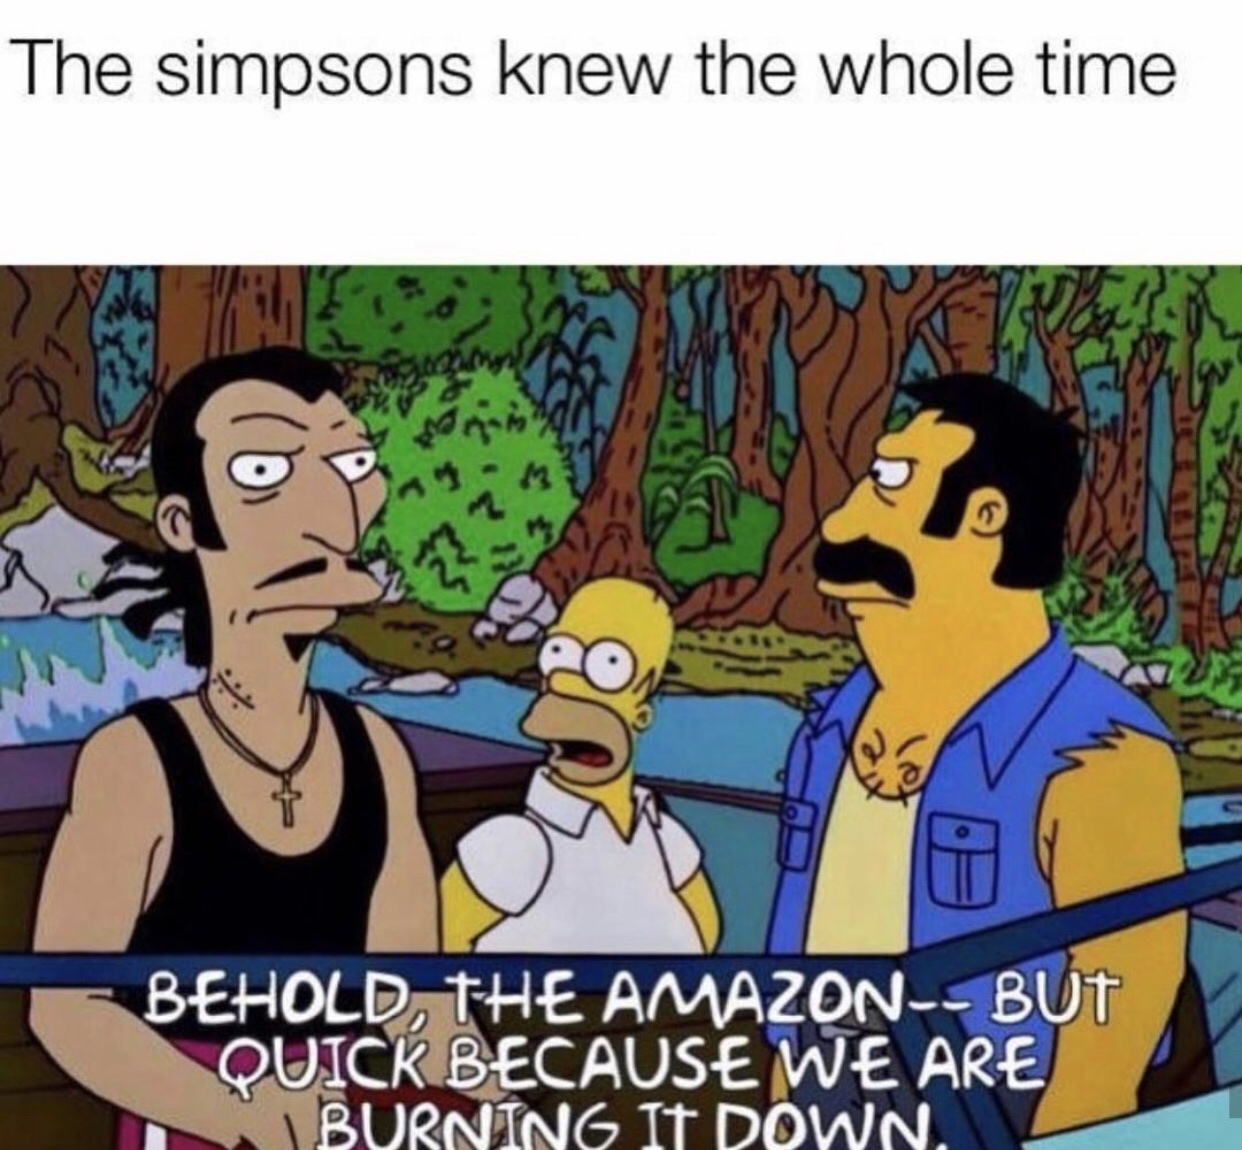 The Simpsons - The simpsons knew the whole time Behold, The Amazon But Quick Because We Are Burning It Down.